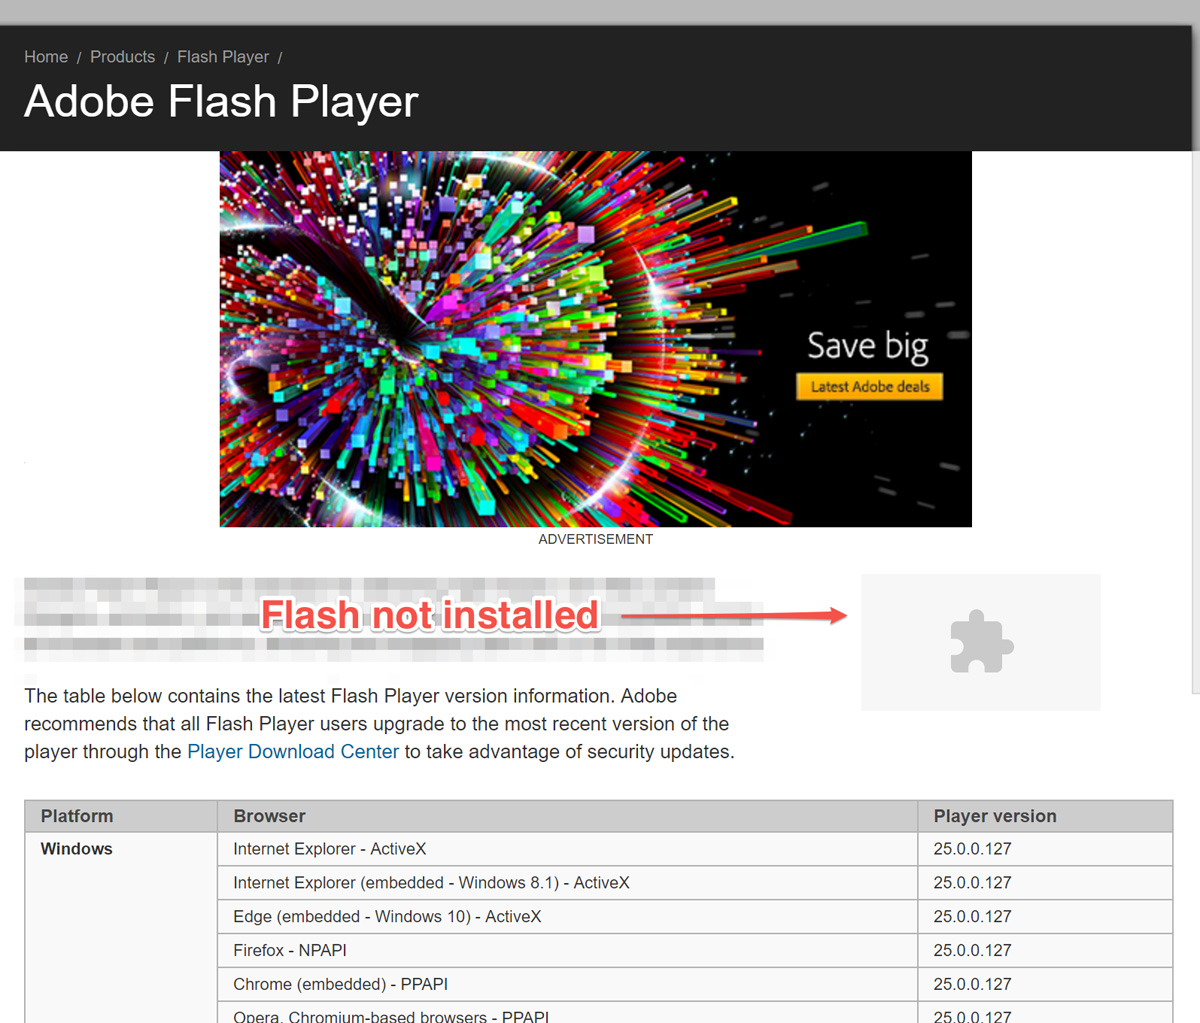 What Is The Latest Adobe Flash Player Version For Mac